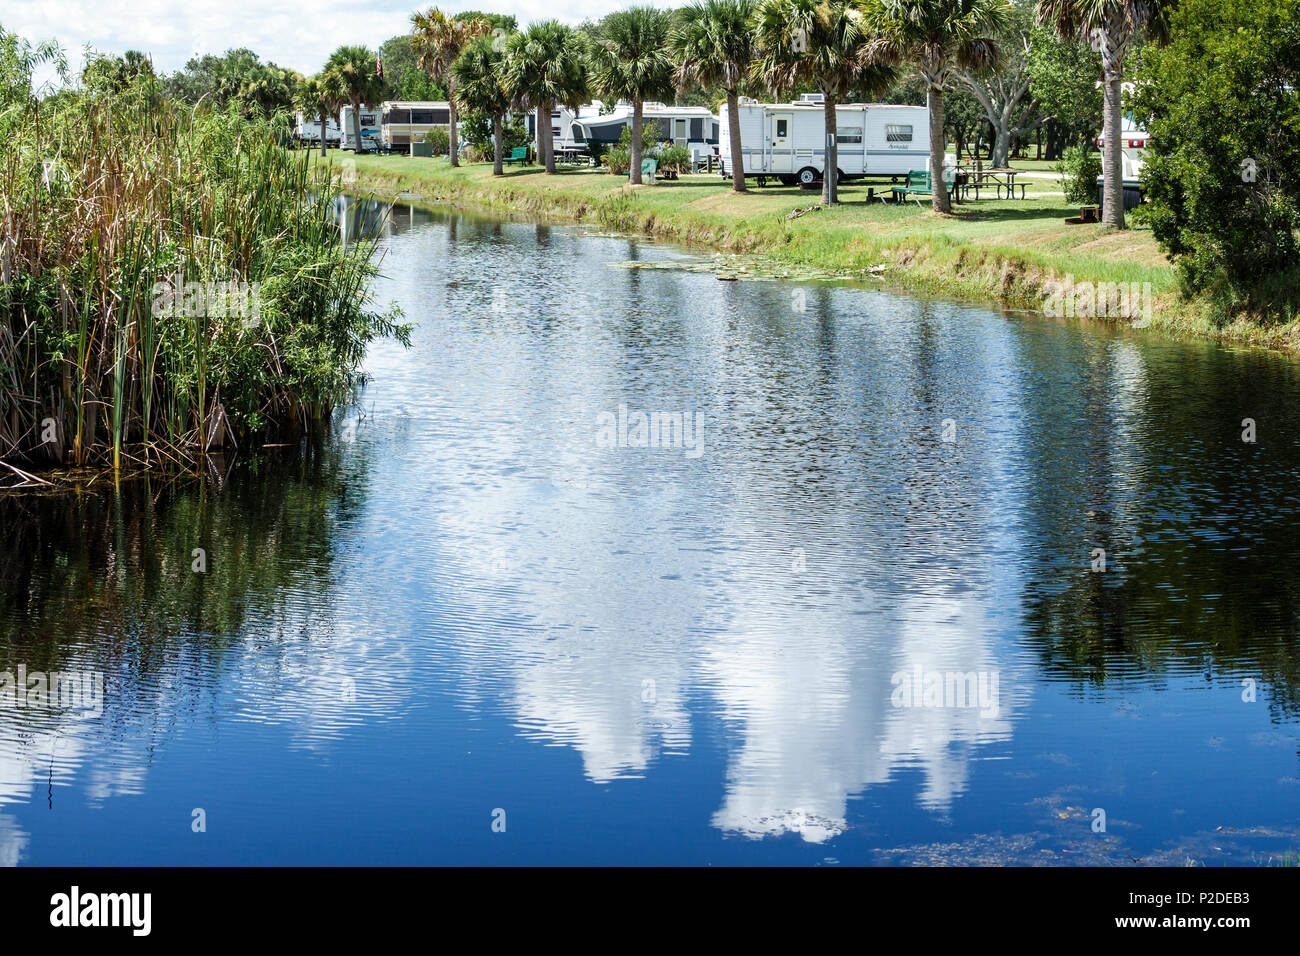 Florida,FL South,Fort Ft. Pierce,Savannas Recreation Area,preserve,environmental protection,county park,overnight camping,campground,RV,canal,water,vi Stock Photo